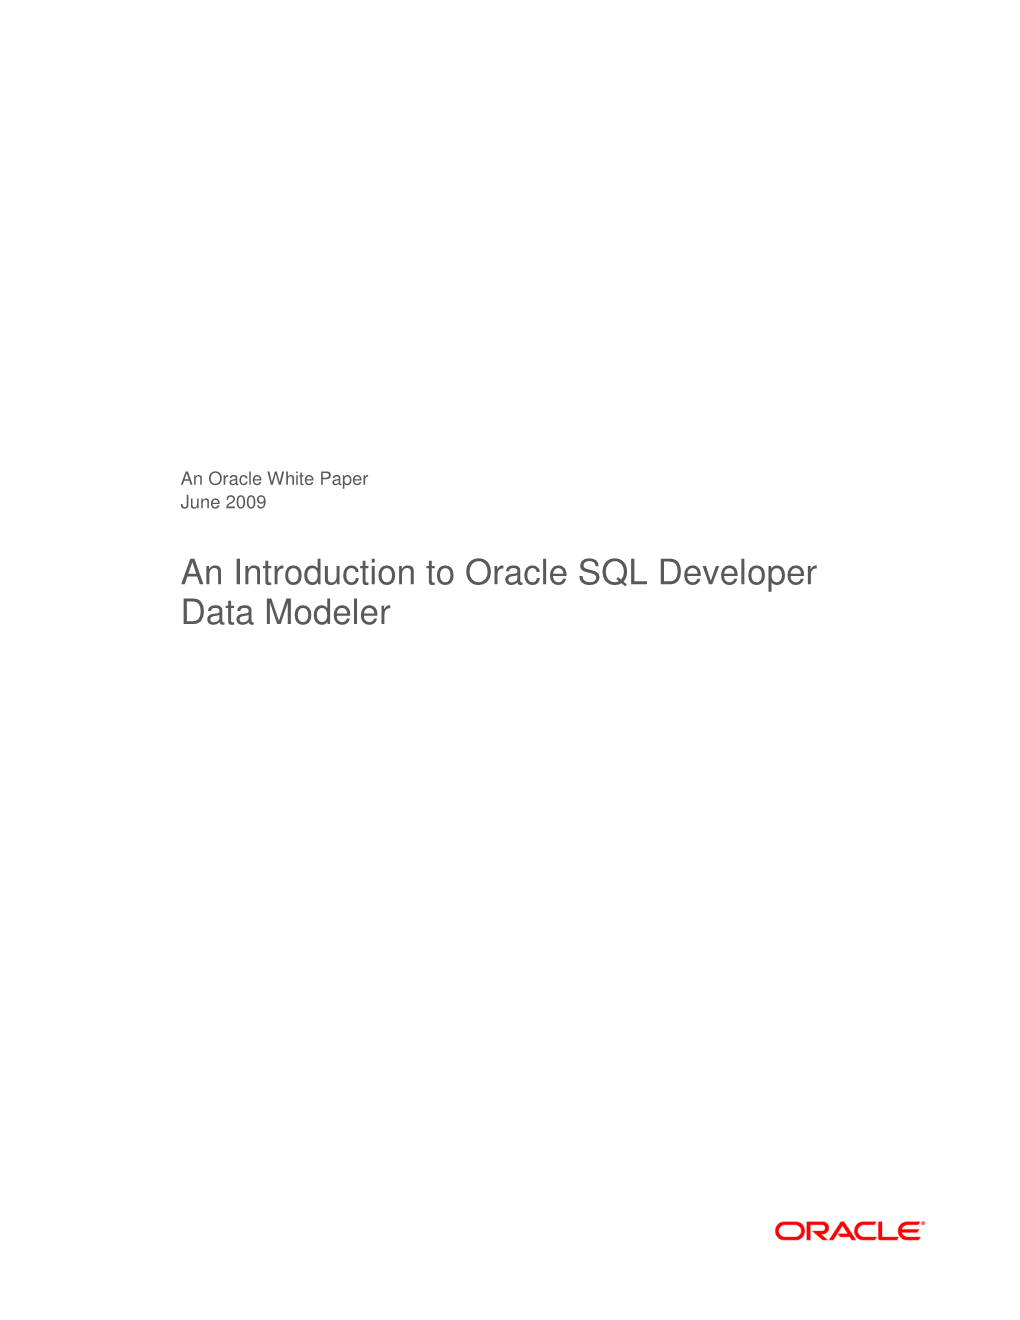 An Introduction to Oracle SQL Developer Data Modeler